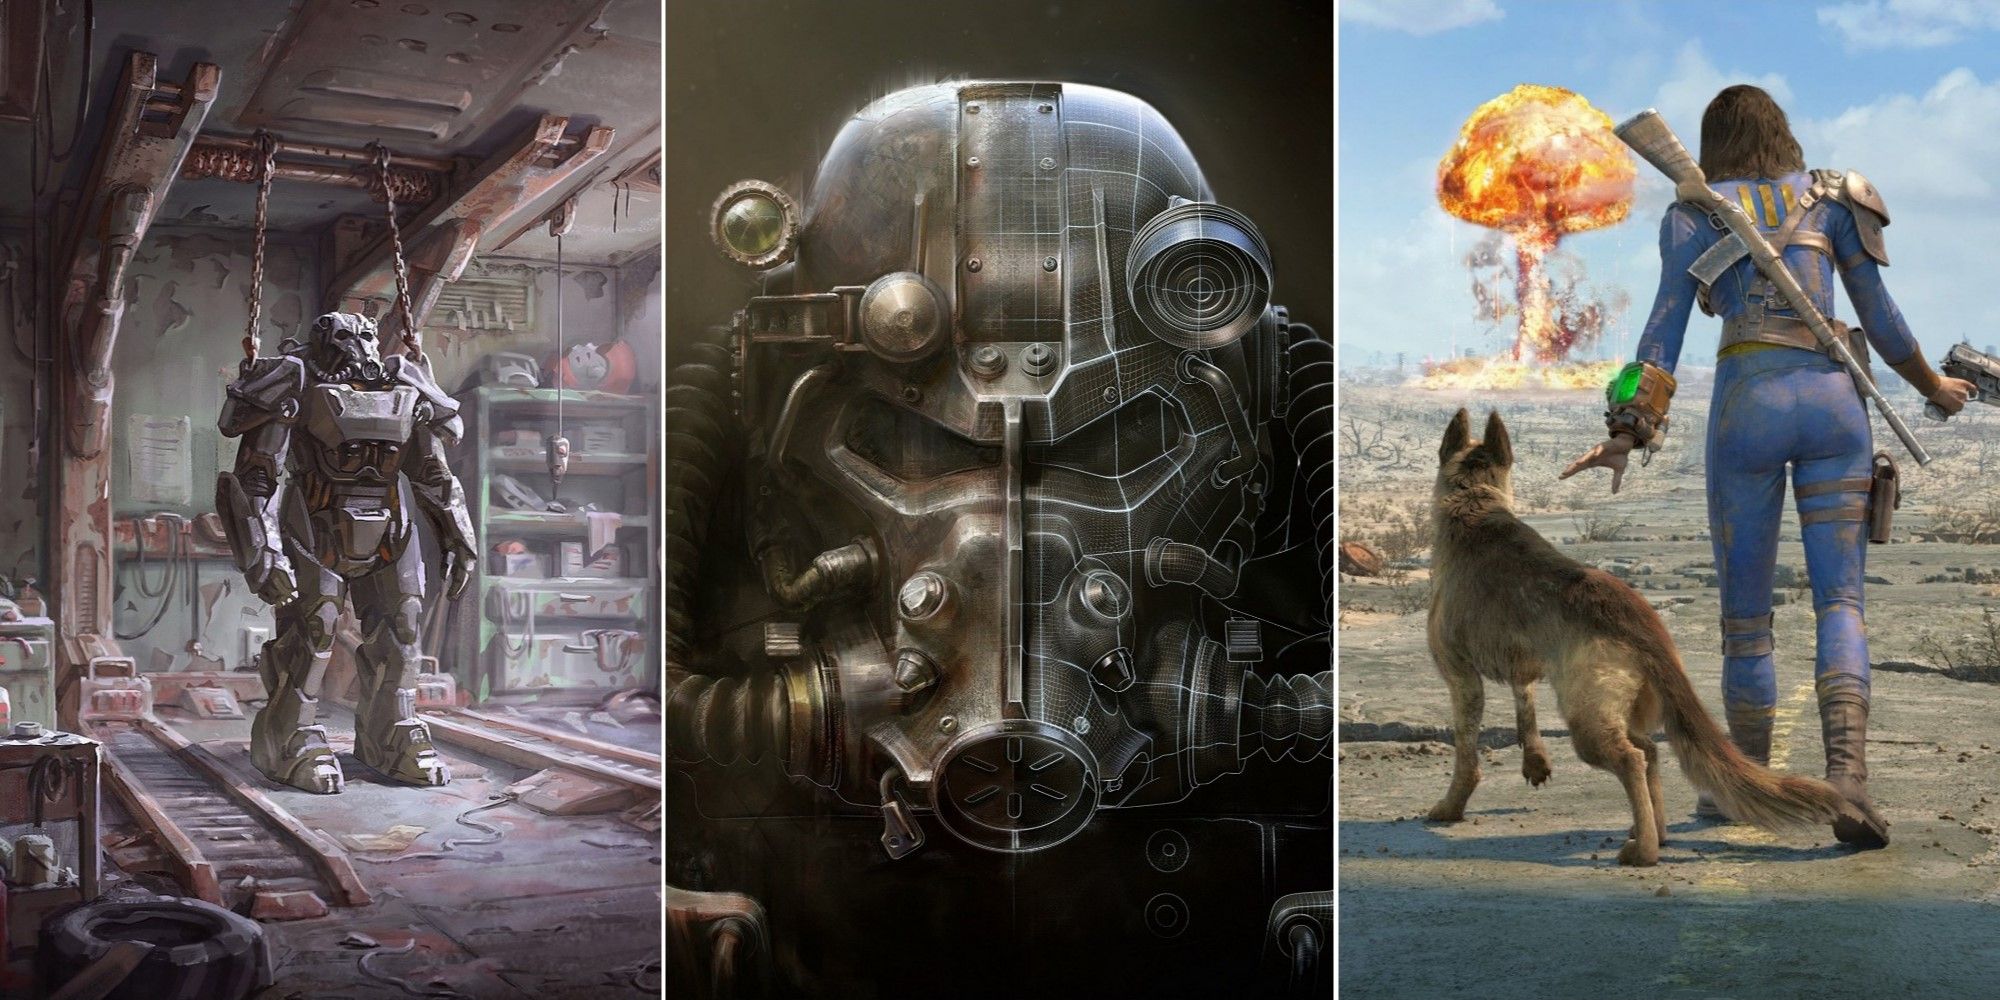 a power armor station, power armor helmet, Dogmeat, and the Sole Survivor in Fallout 4